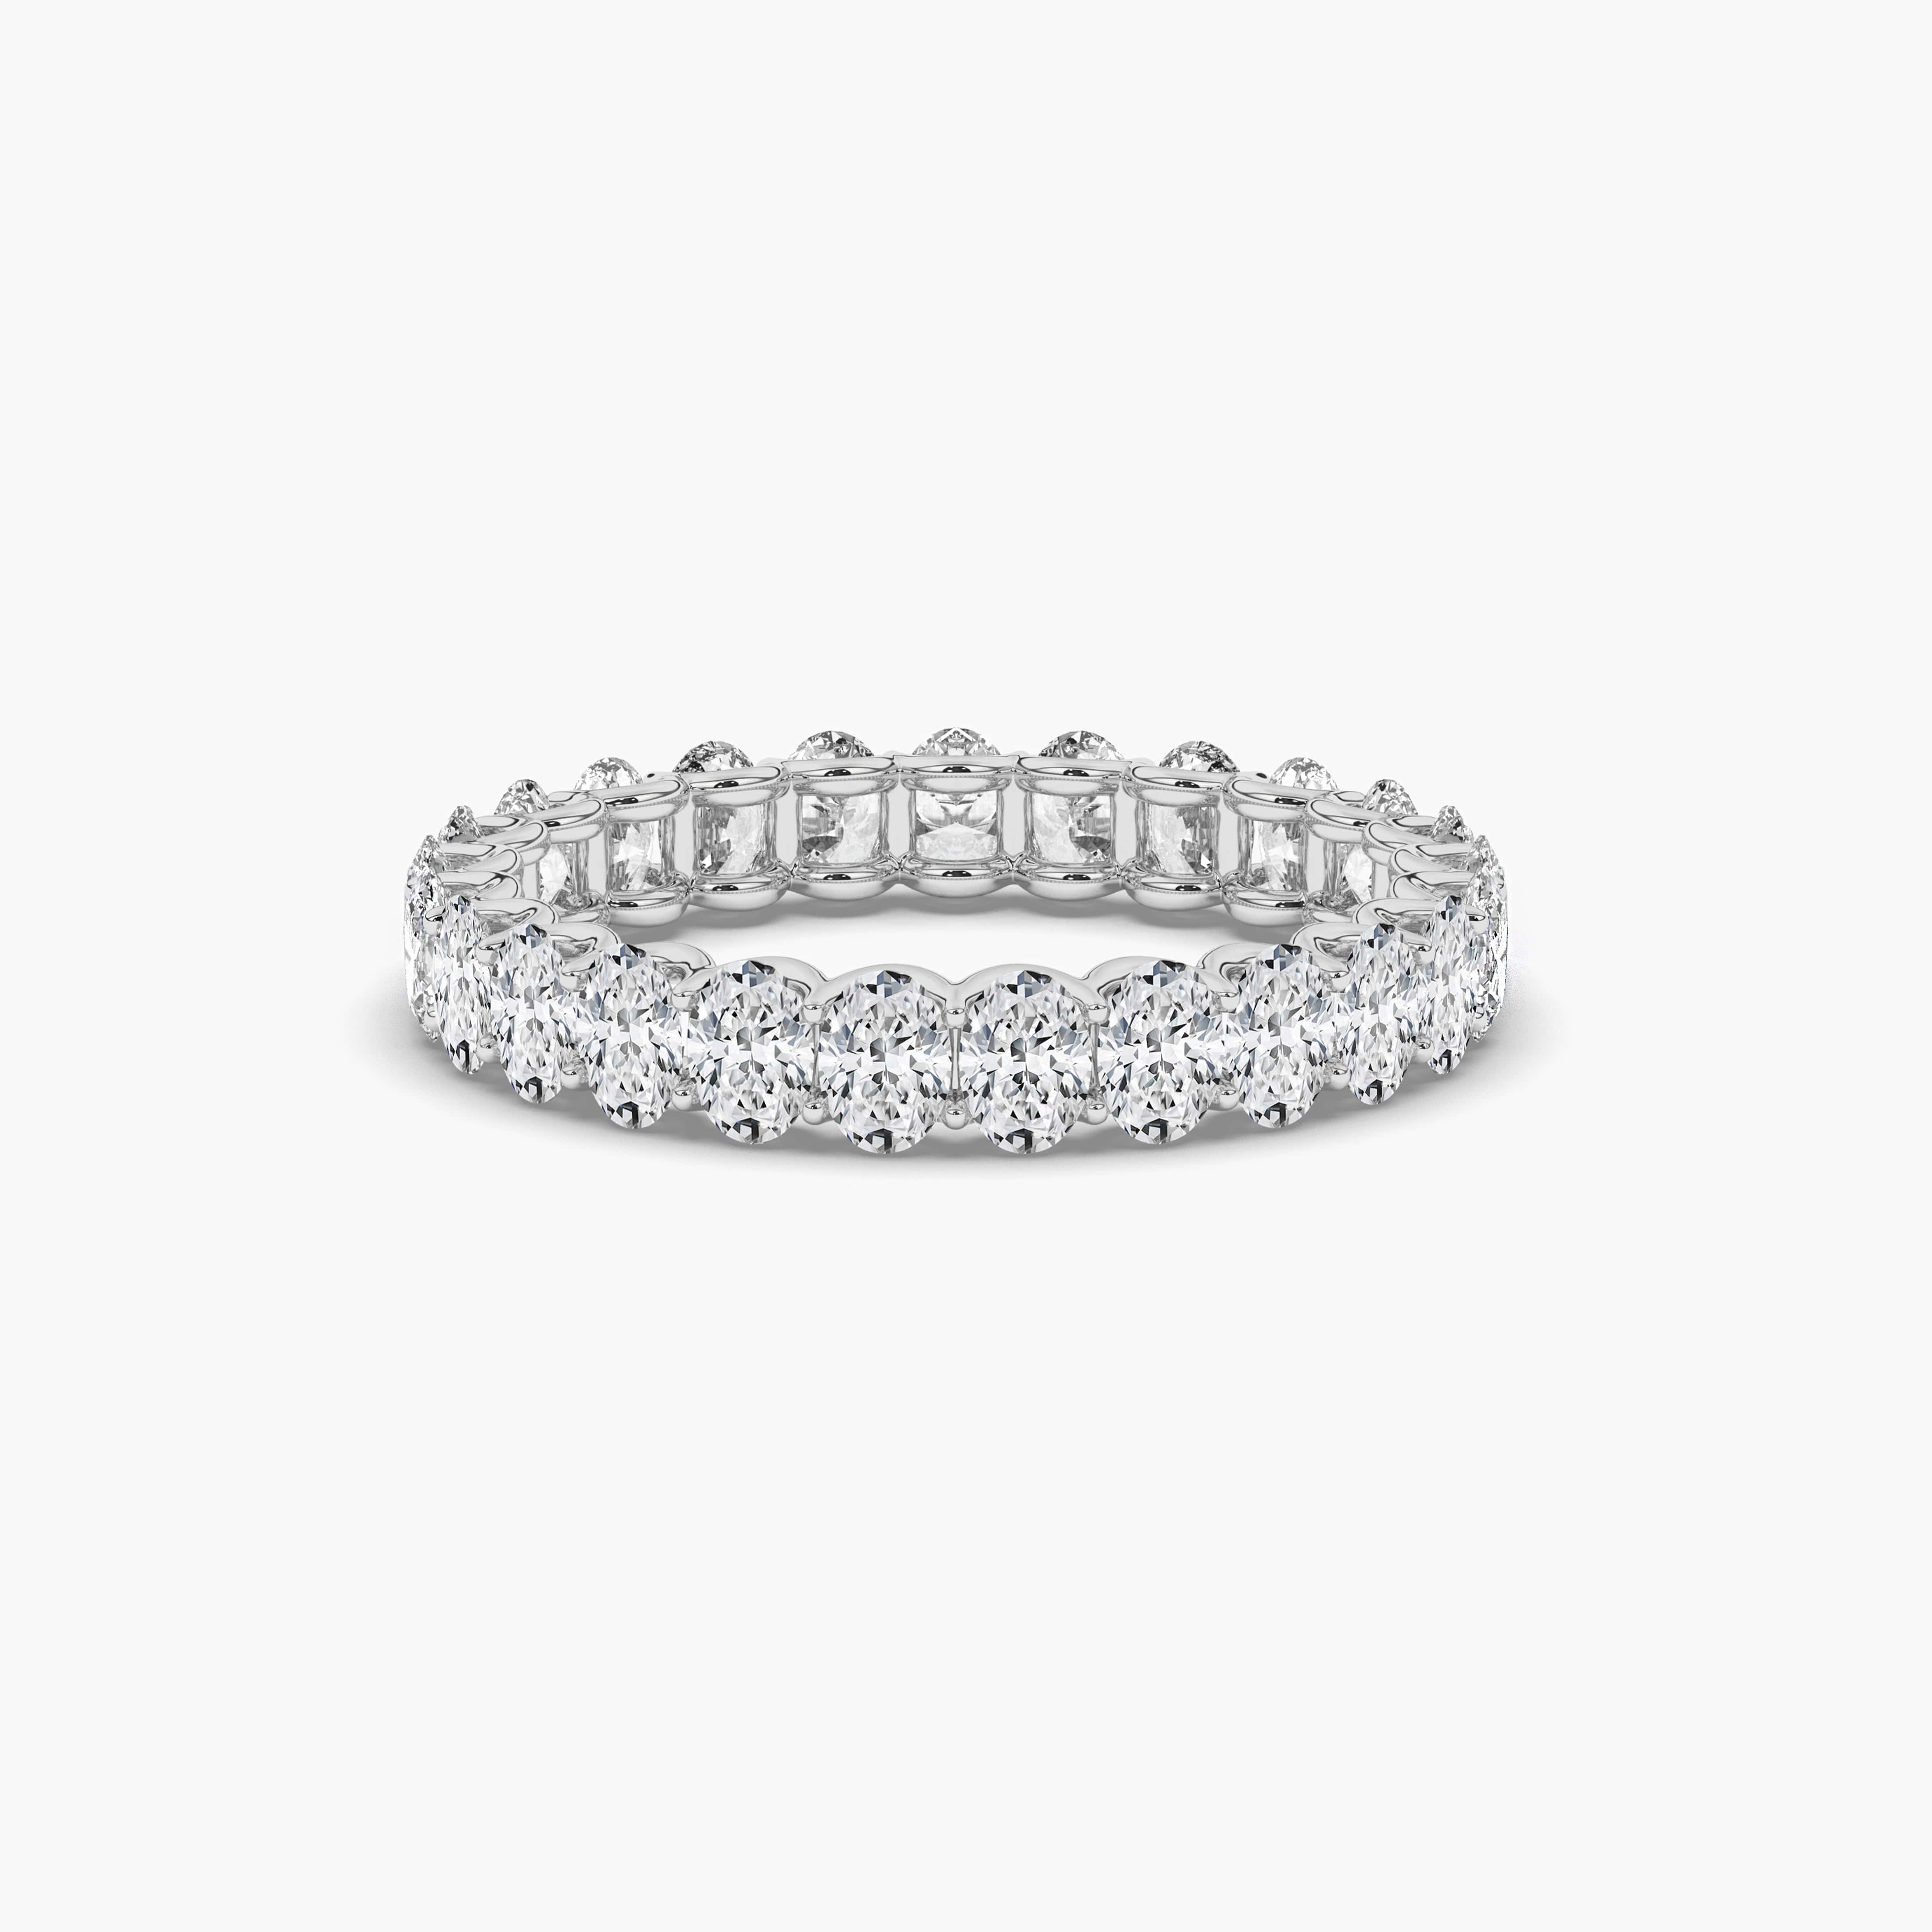 OVAL DIAMOND ETERNITY BAND IN WHITE GOLD